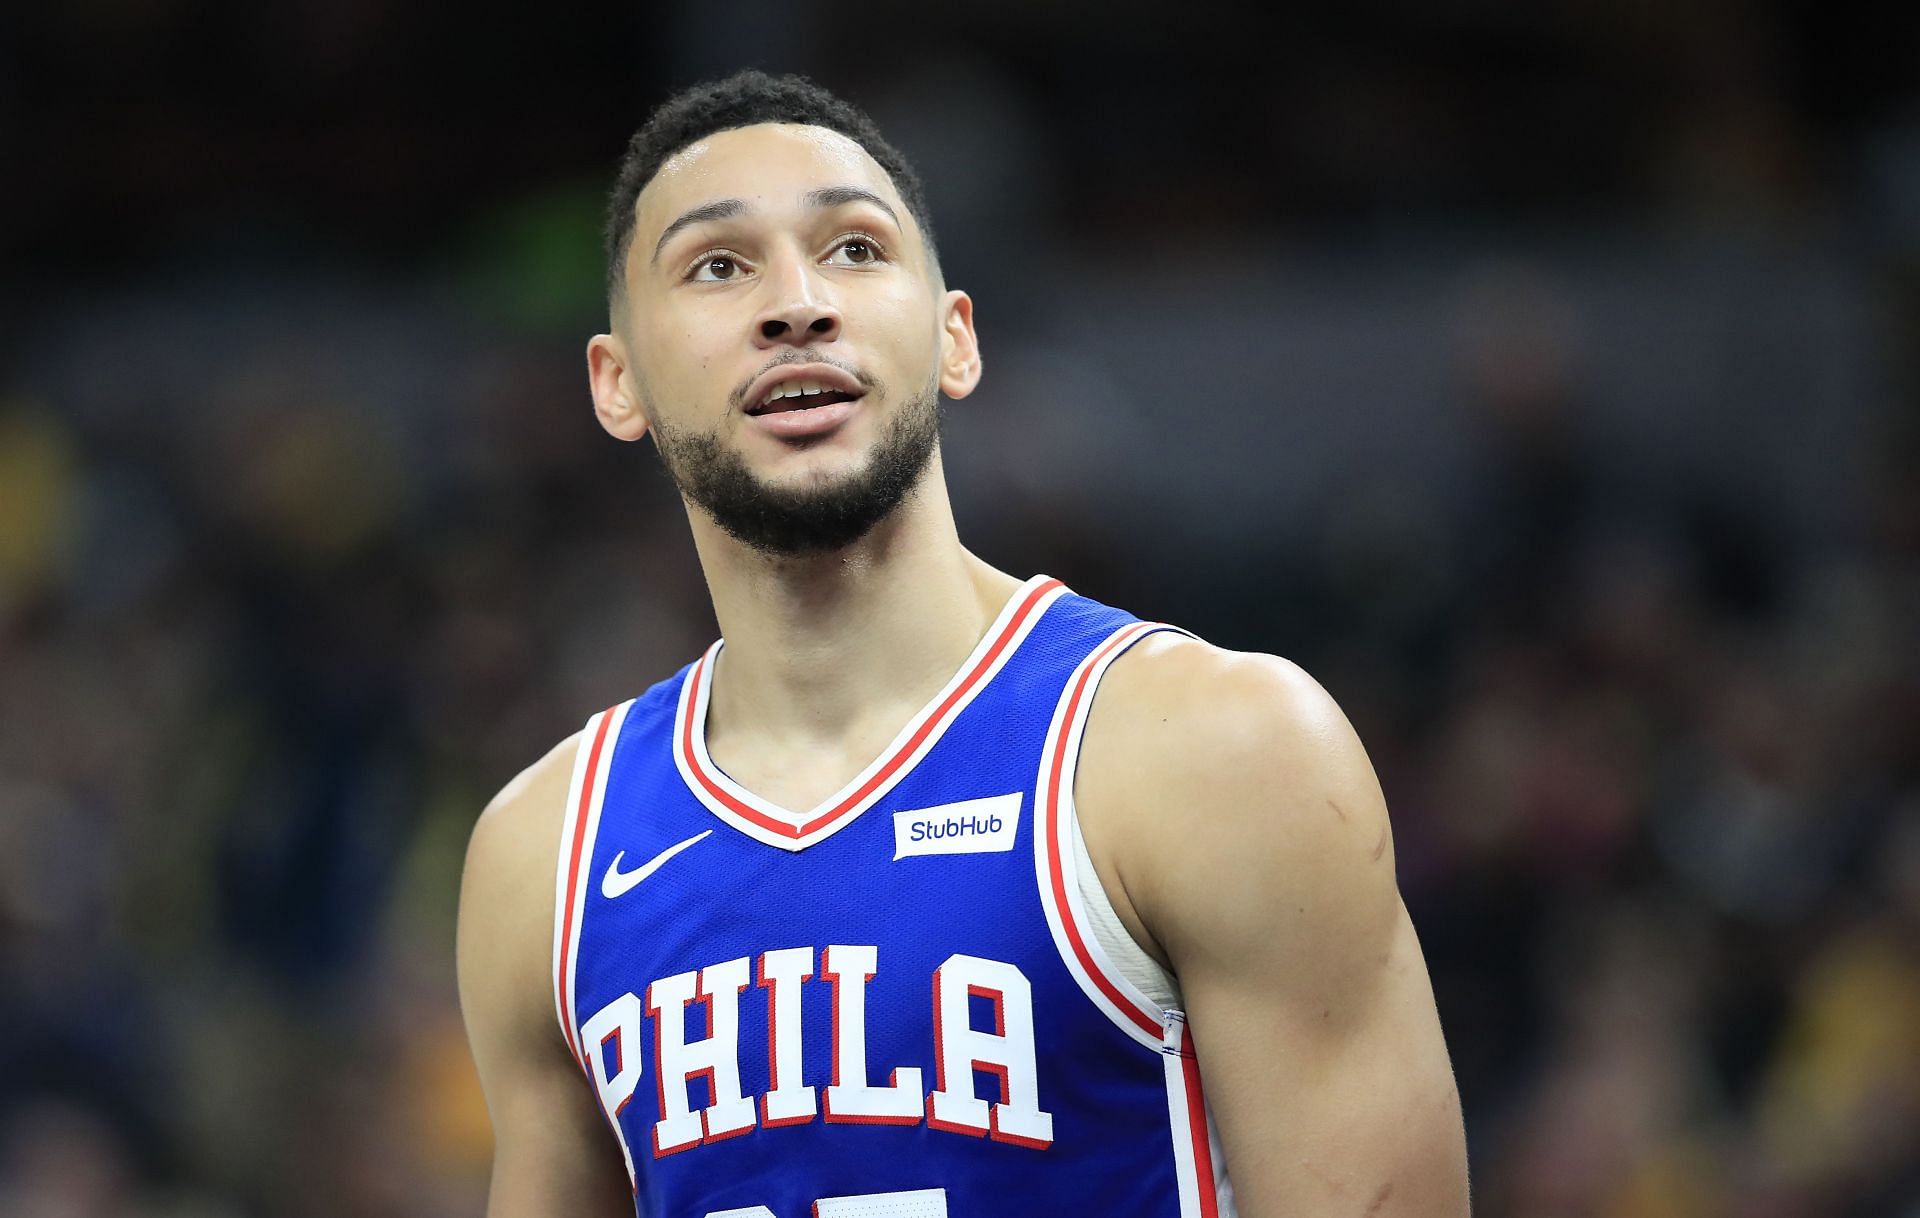 How have Ben Simmons' stats changed since his transition from the  Philadelphia 76ers to the Brooklyn Nets?